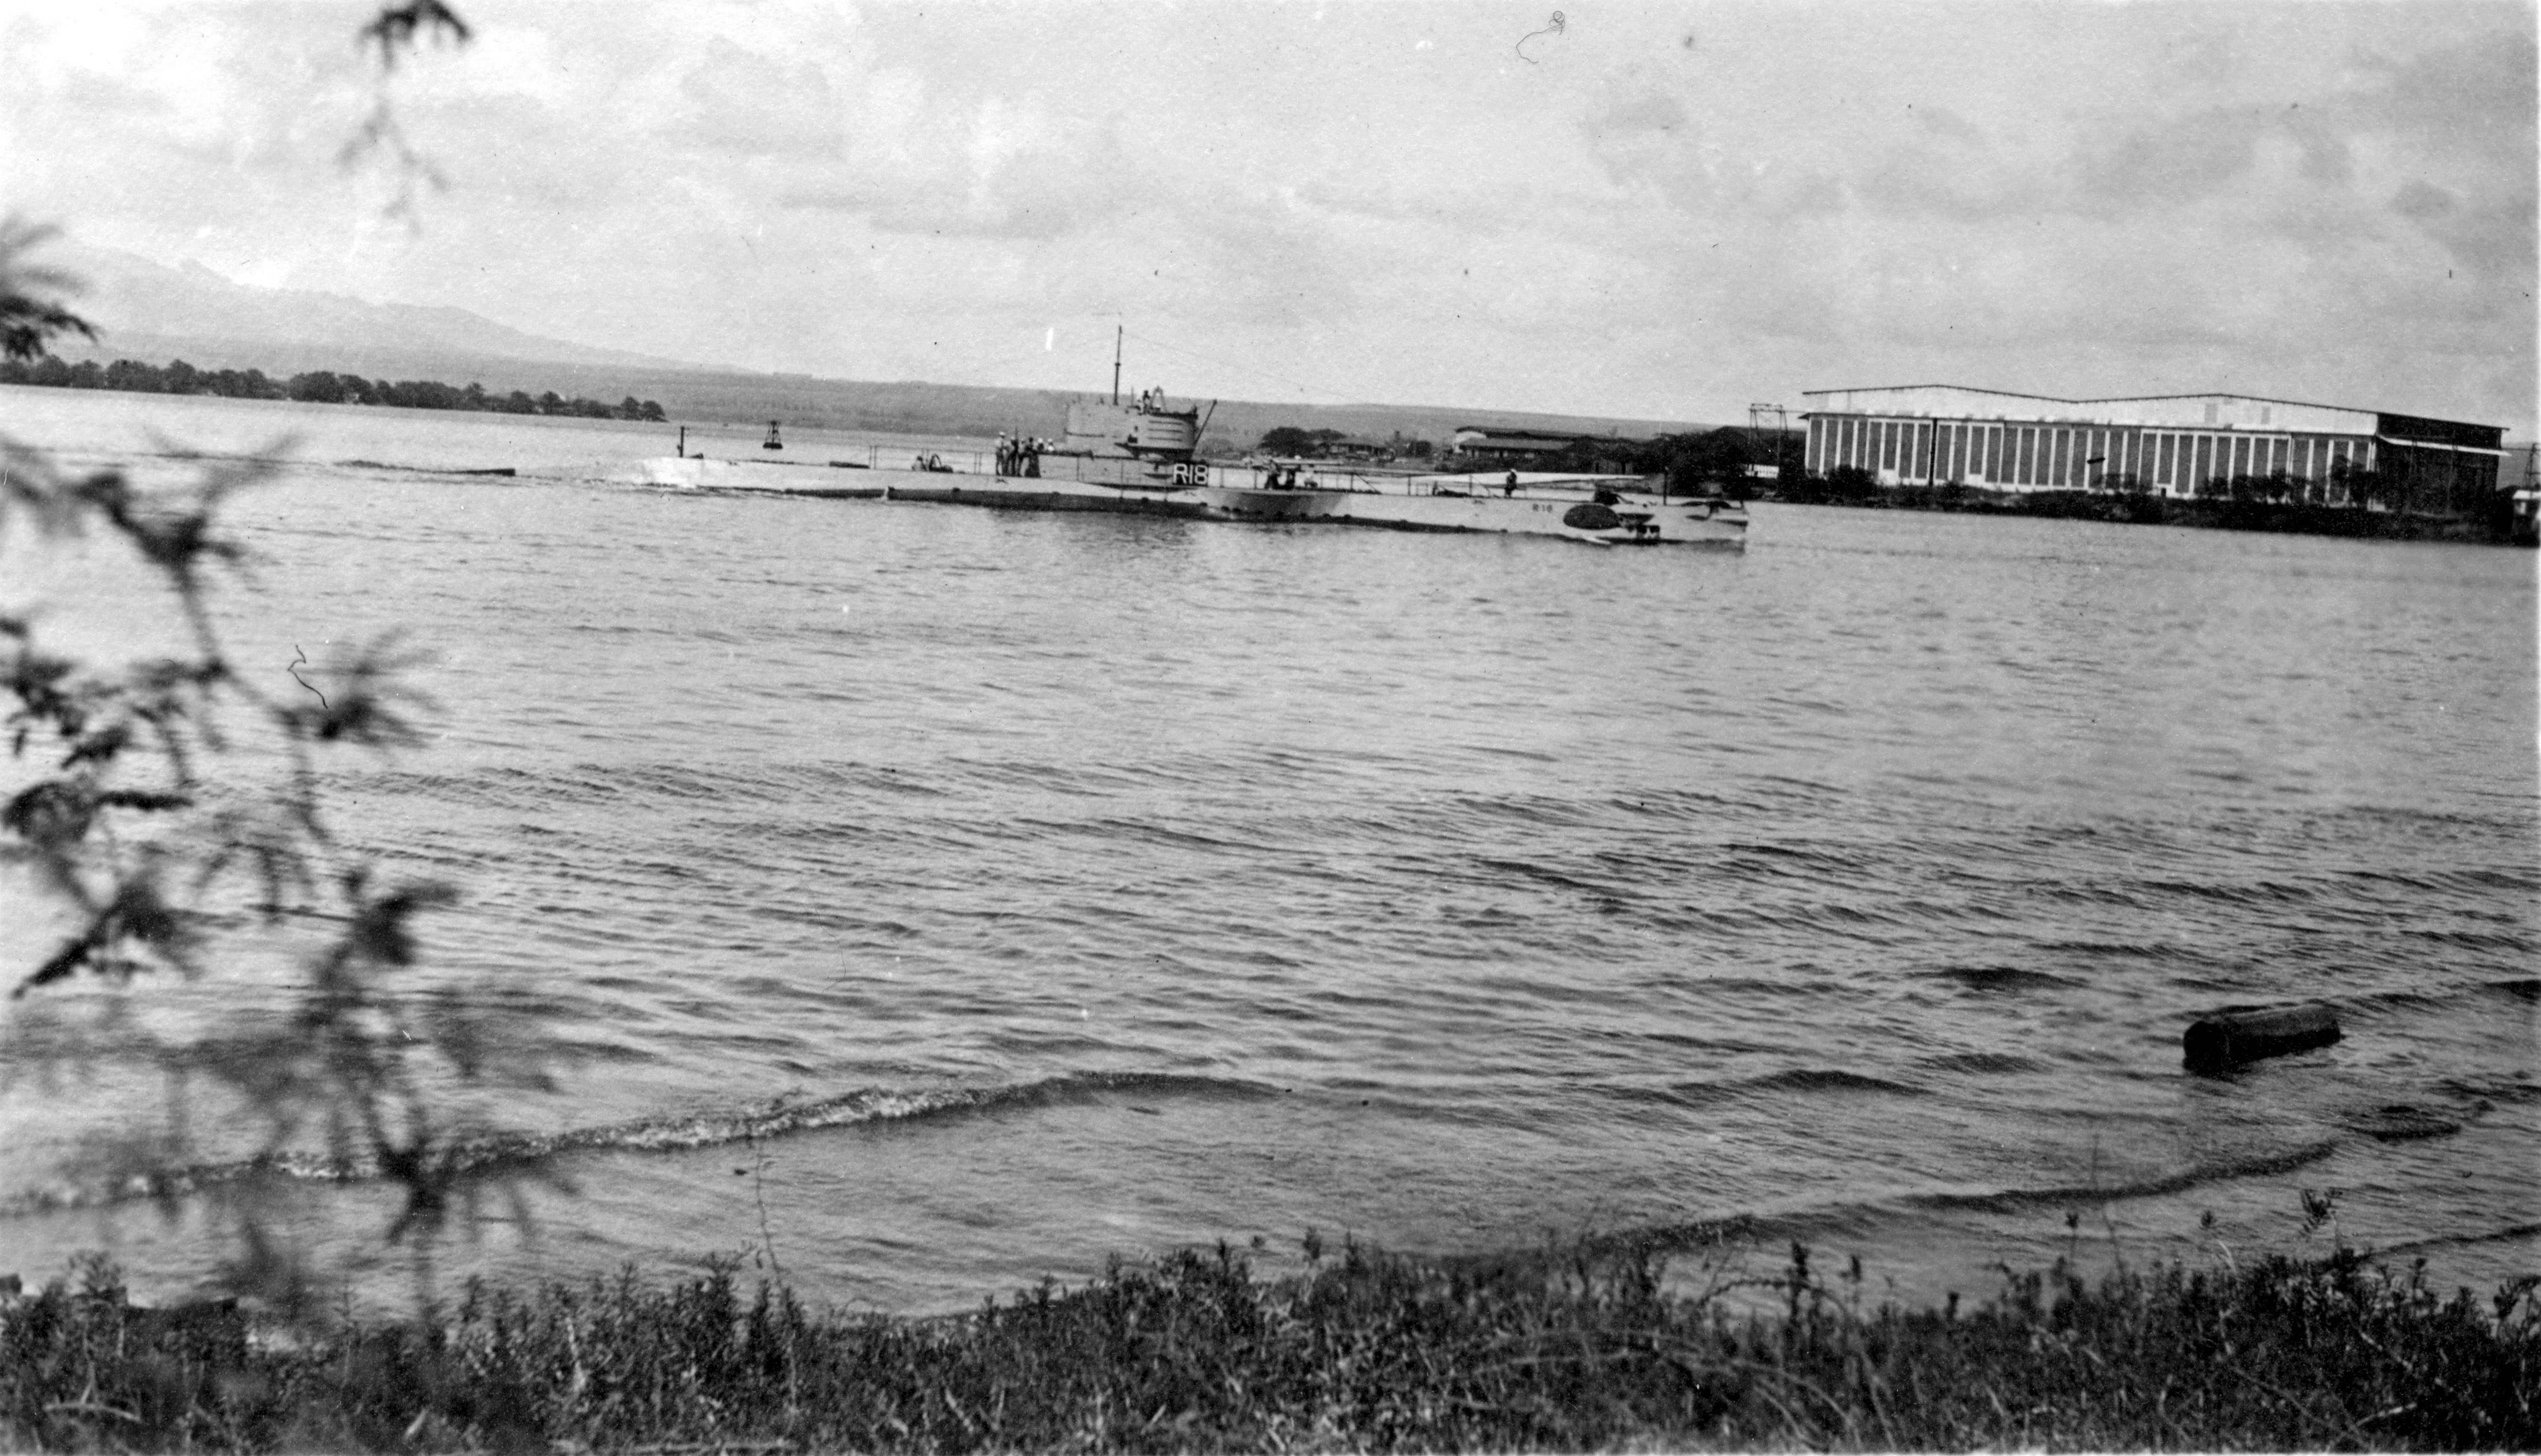 US Submarine R-18 rounding Hospital Point and entering Pearl Harbor’s Main Channel, Pearl Harbor, Hawaii, 1920s. Note Ford Island seaplane hangars on the right.